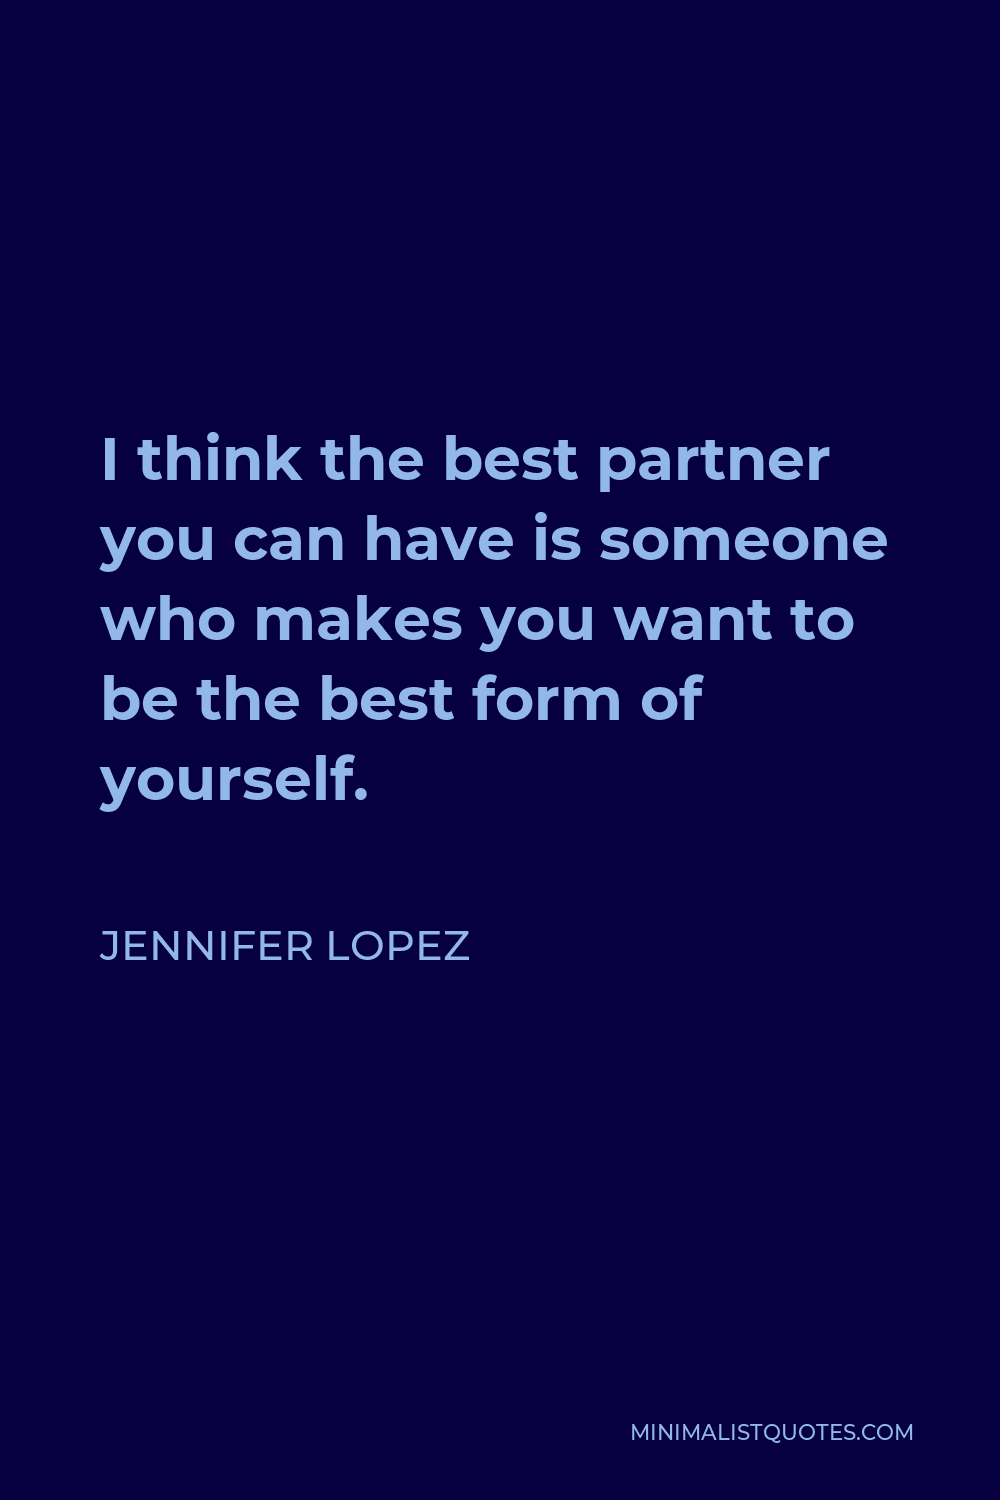 Jennifer Lopez Quote - I think the best partner you can have is someone who makes you want to be the best form of yourself.